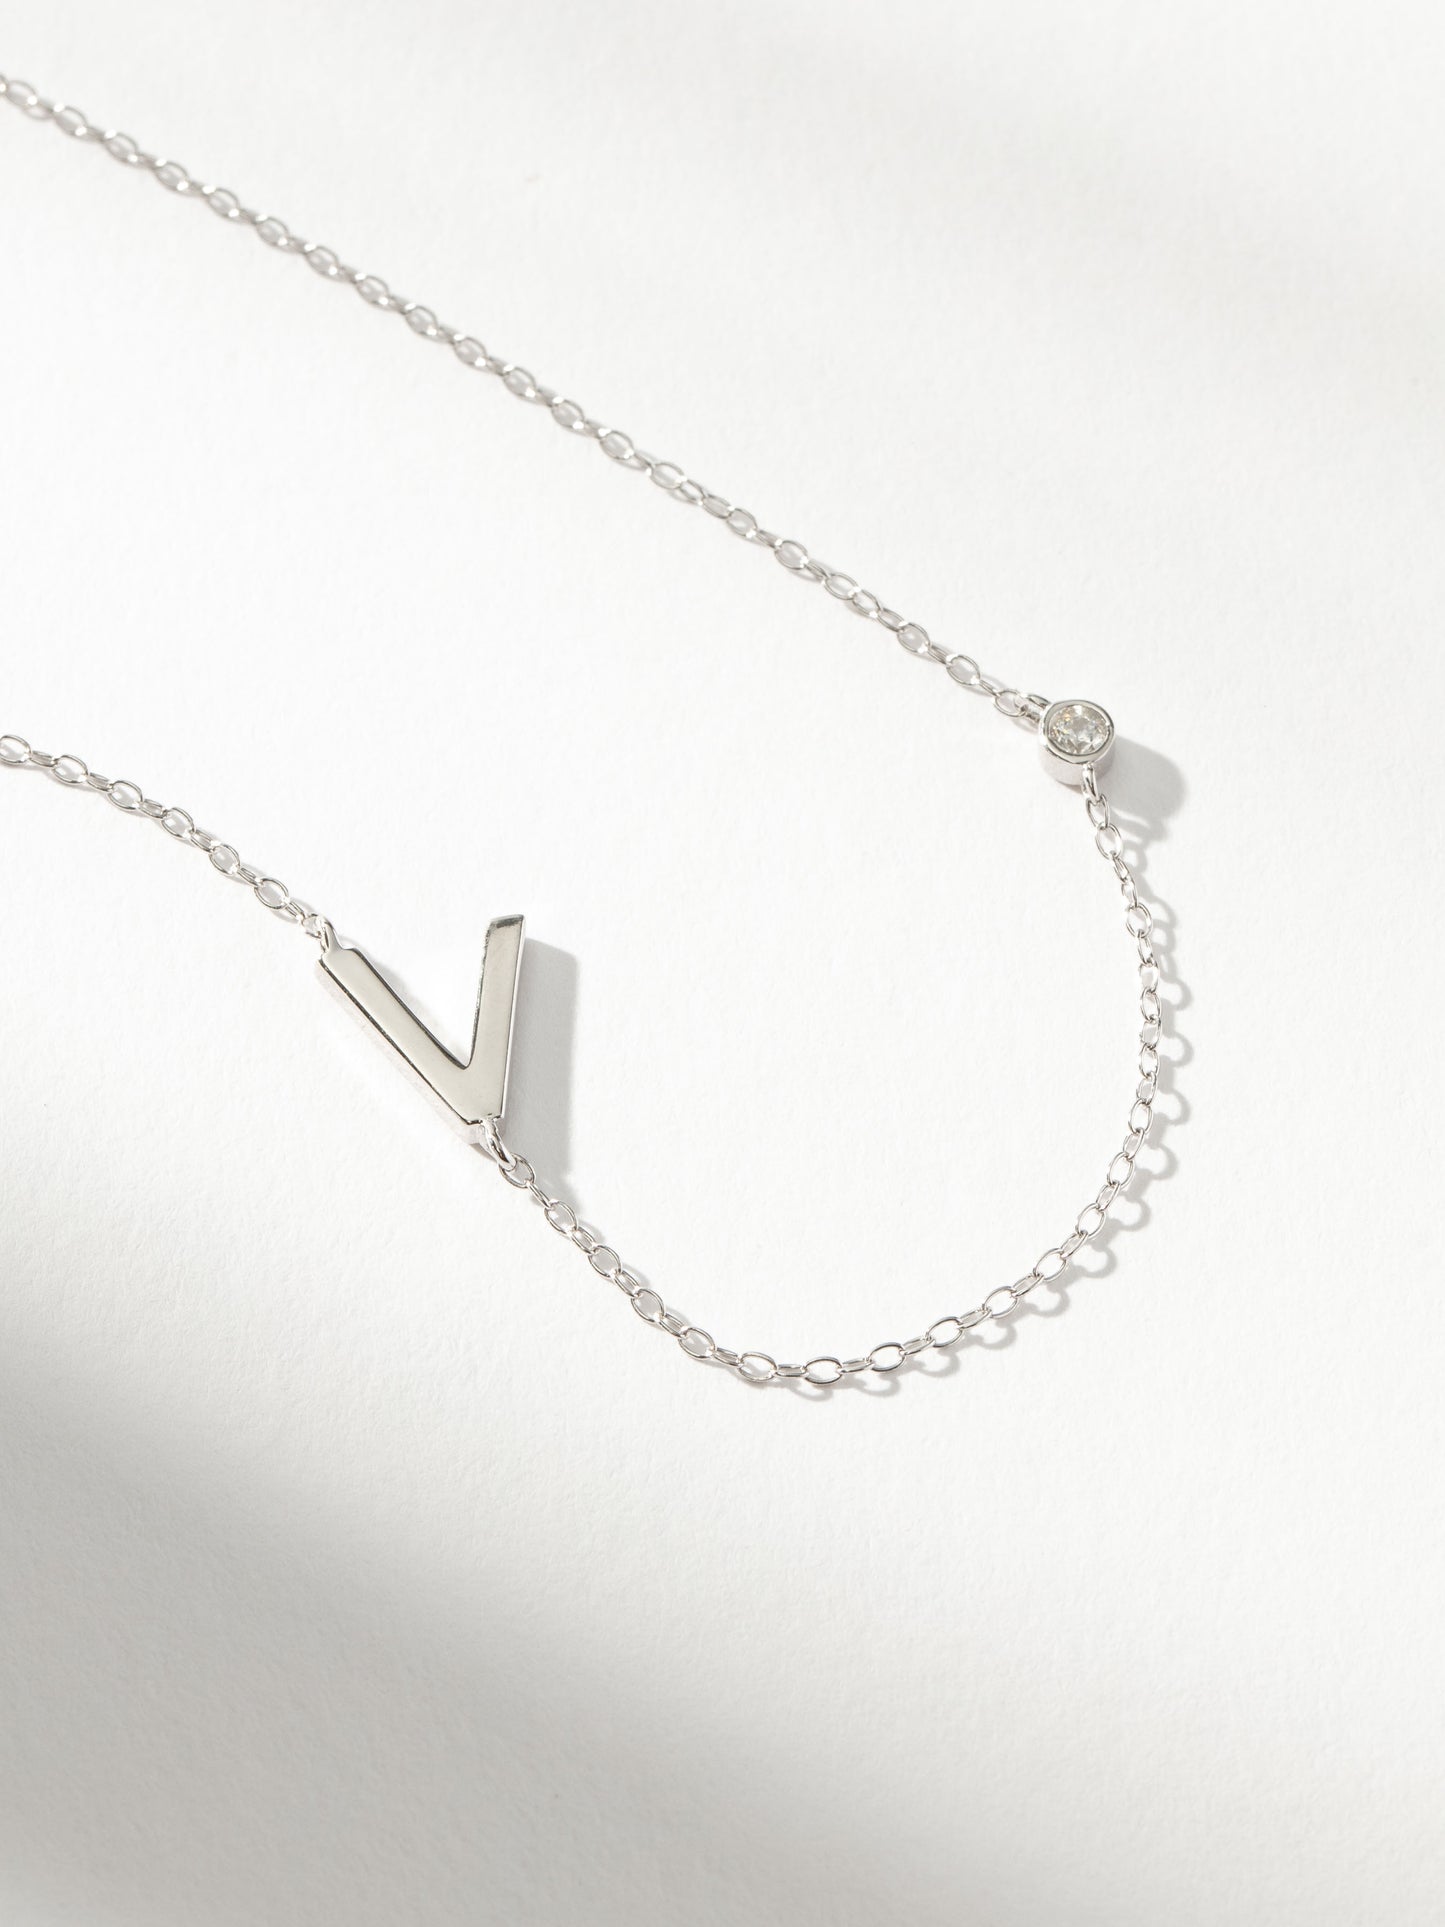 Personalized Touch Necklace | Sterling Silver V | Product Image | Uncommon James